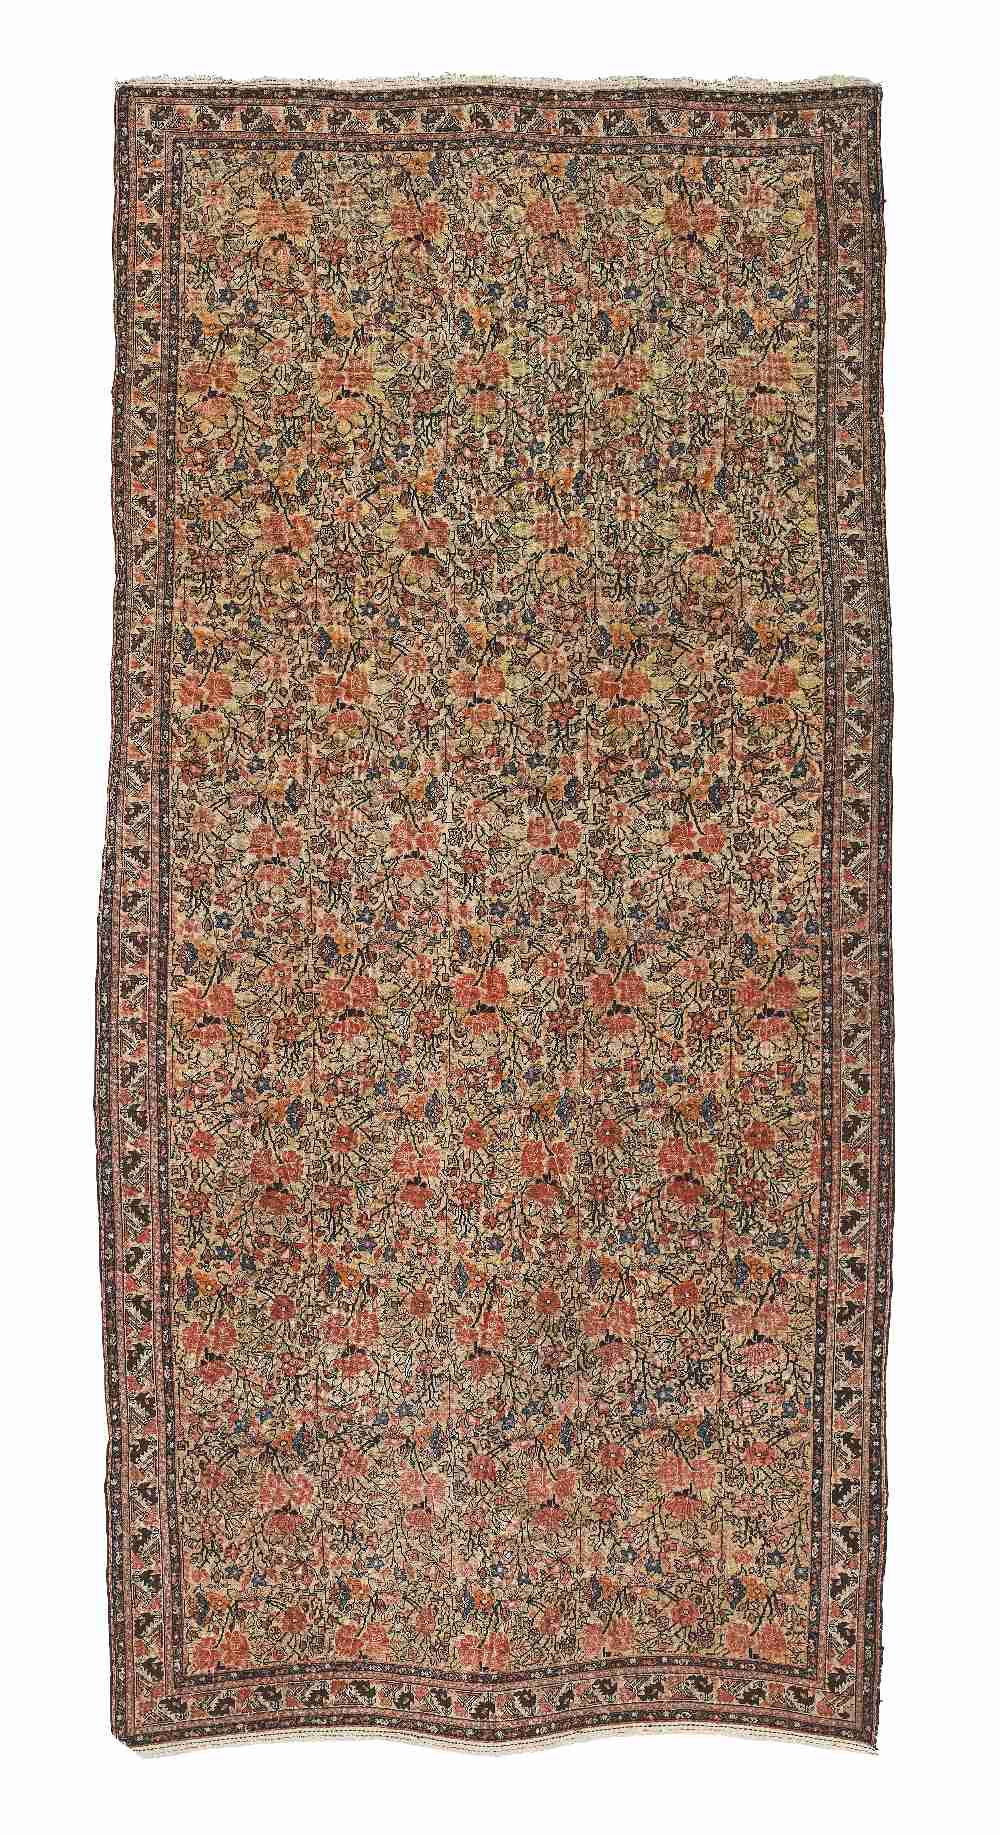 A Senneh carpet North-West Persia, early 20th century, 330cm x 156cm